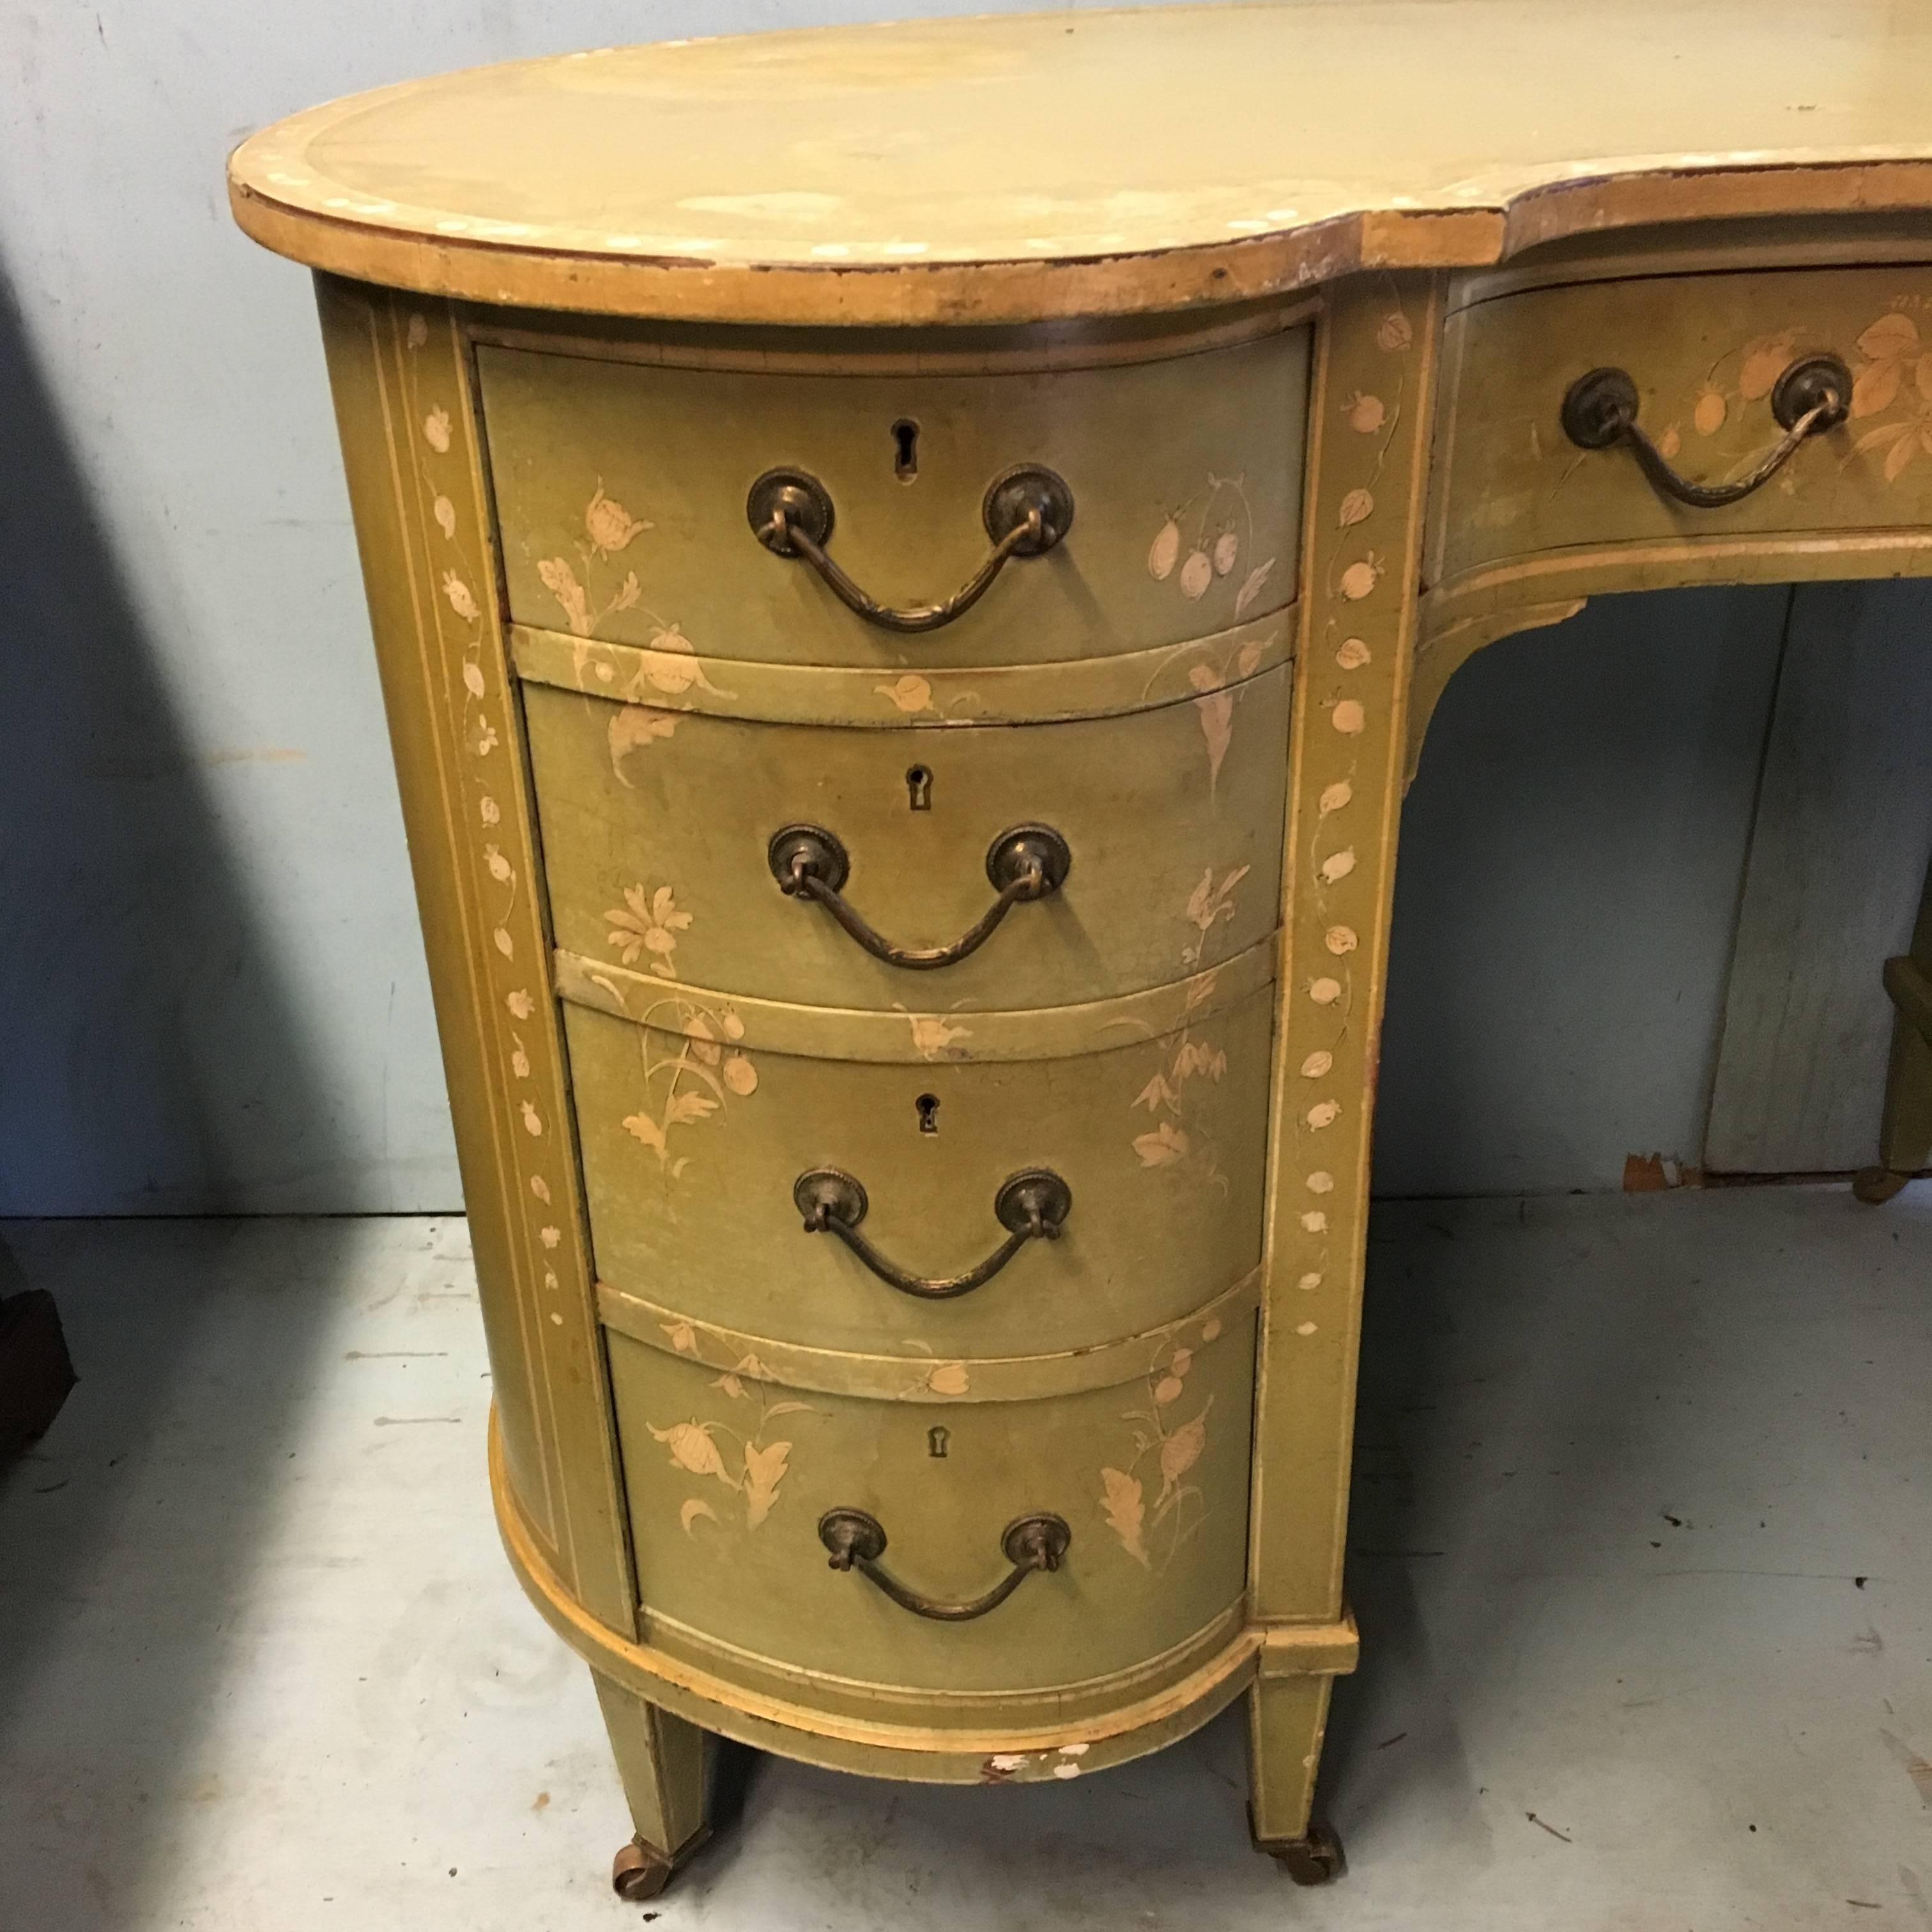 Very pretty and decorative early 20th century ladies writing desk. 
Dating to about circa 1915, this delightful desk has hand-painted floral designs onto a pale green background. Standing on eight tapered and decorated legs with original brass